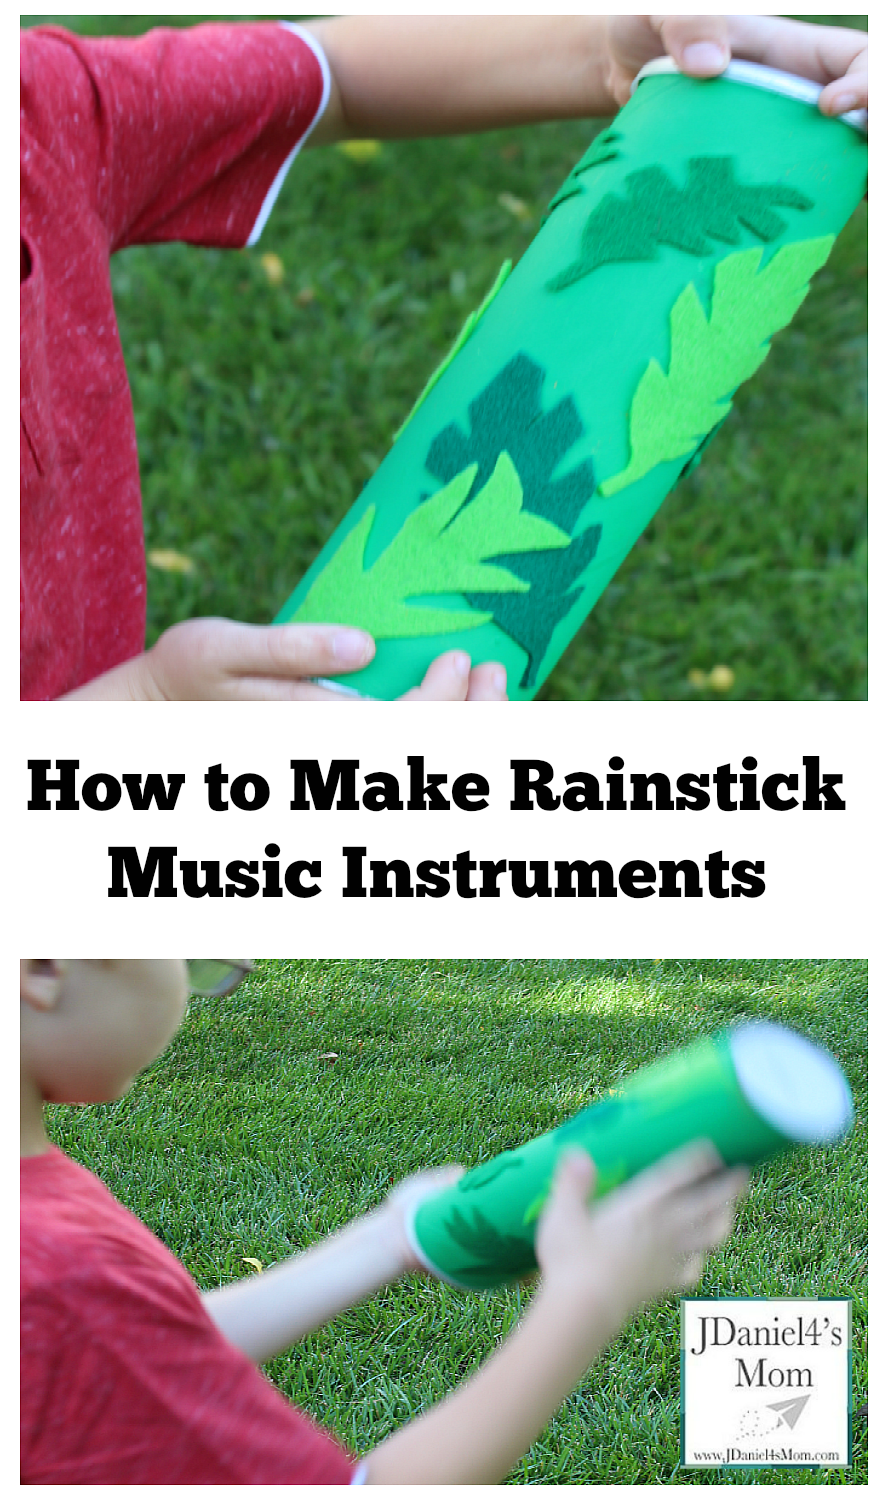 Here is how to make rainstick music instruments at home 